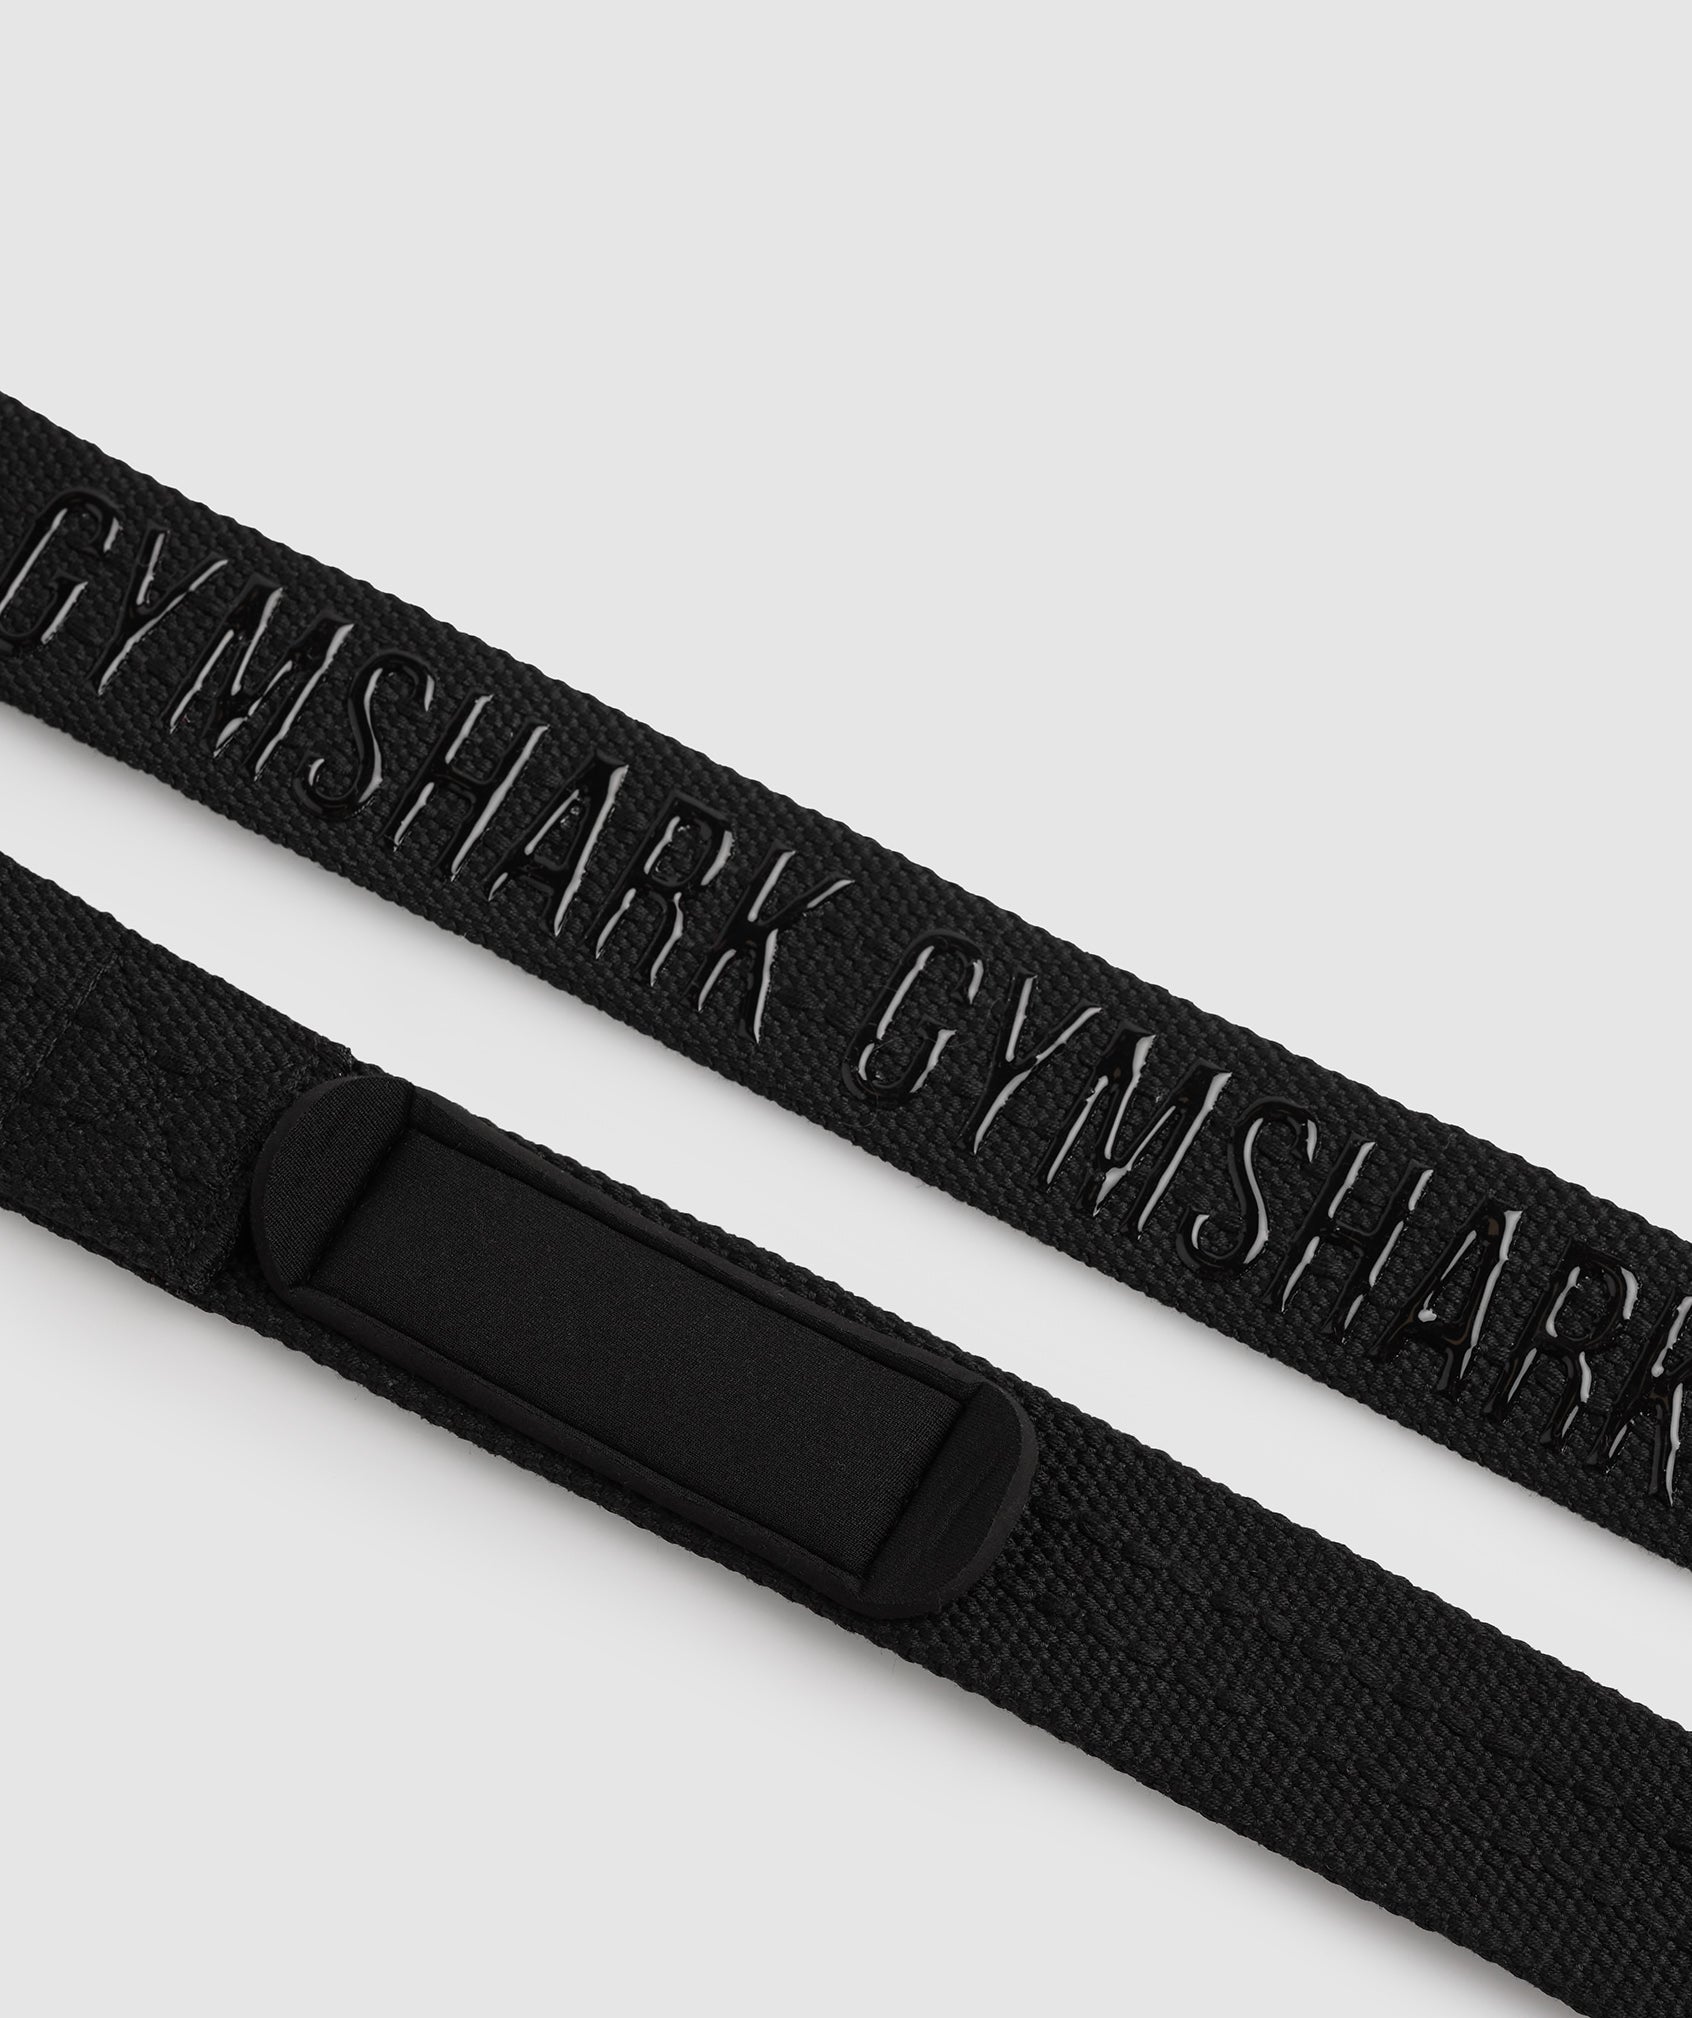 Silicone Grip Lifting Straps in Black